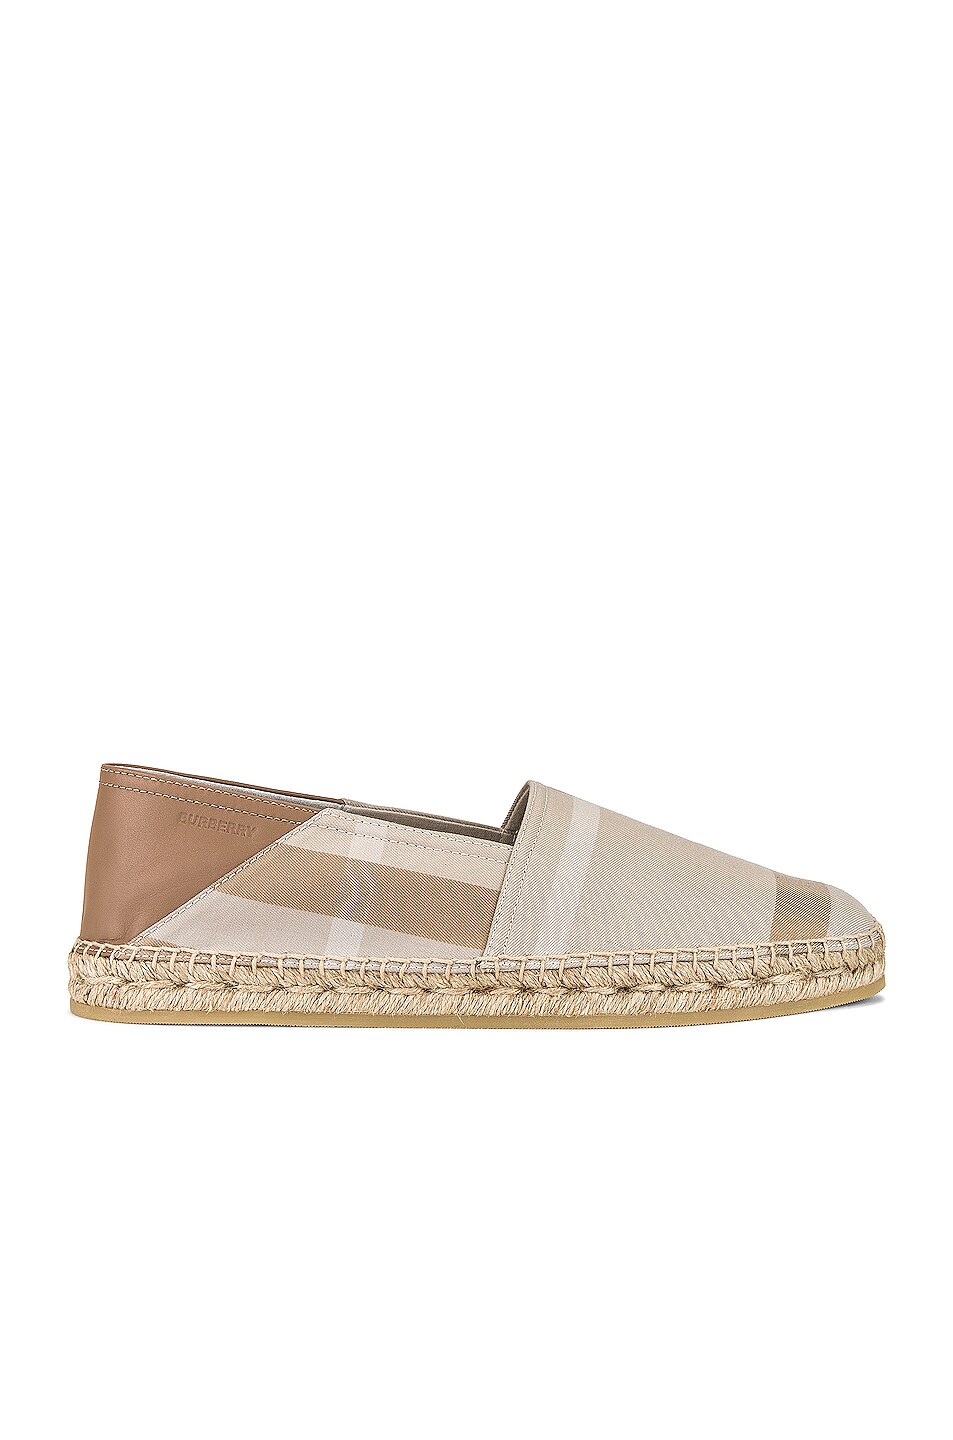 Image 1 of Burberry Alport Sandal in Soft Fawn